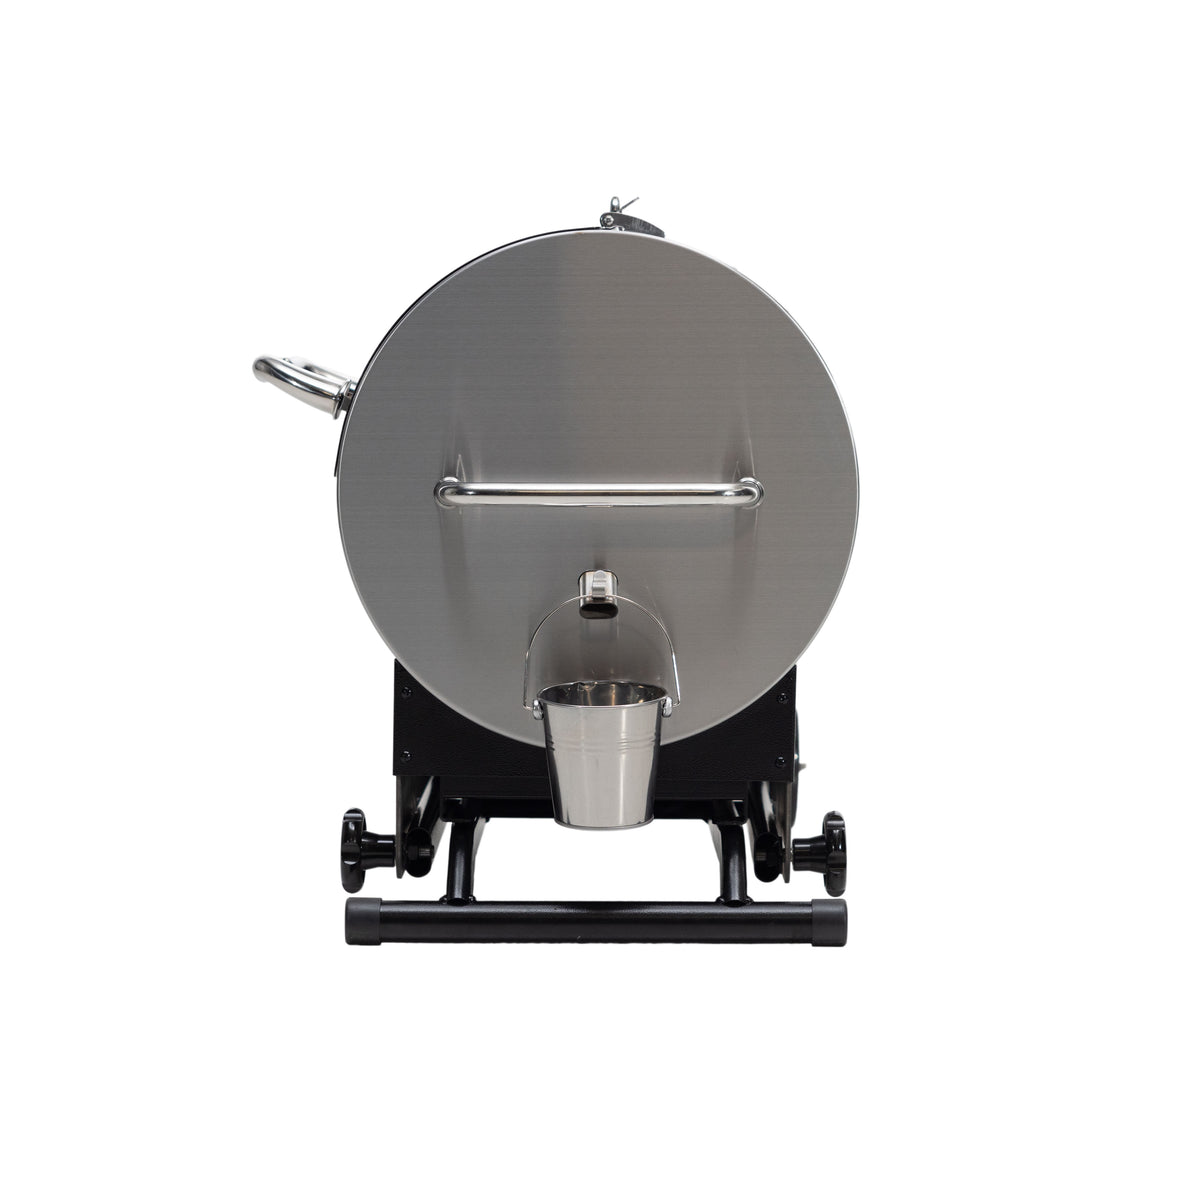  recteq Road Warrior 340 Portable Pellet Grill, Electric  Pellet Smoker Grill, BBQ Grill, Outdoor Grill - Wood Pellets - Grill, Sear,  Smoke, and More!